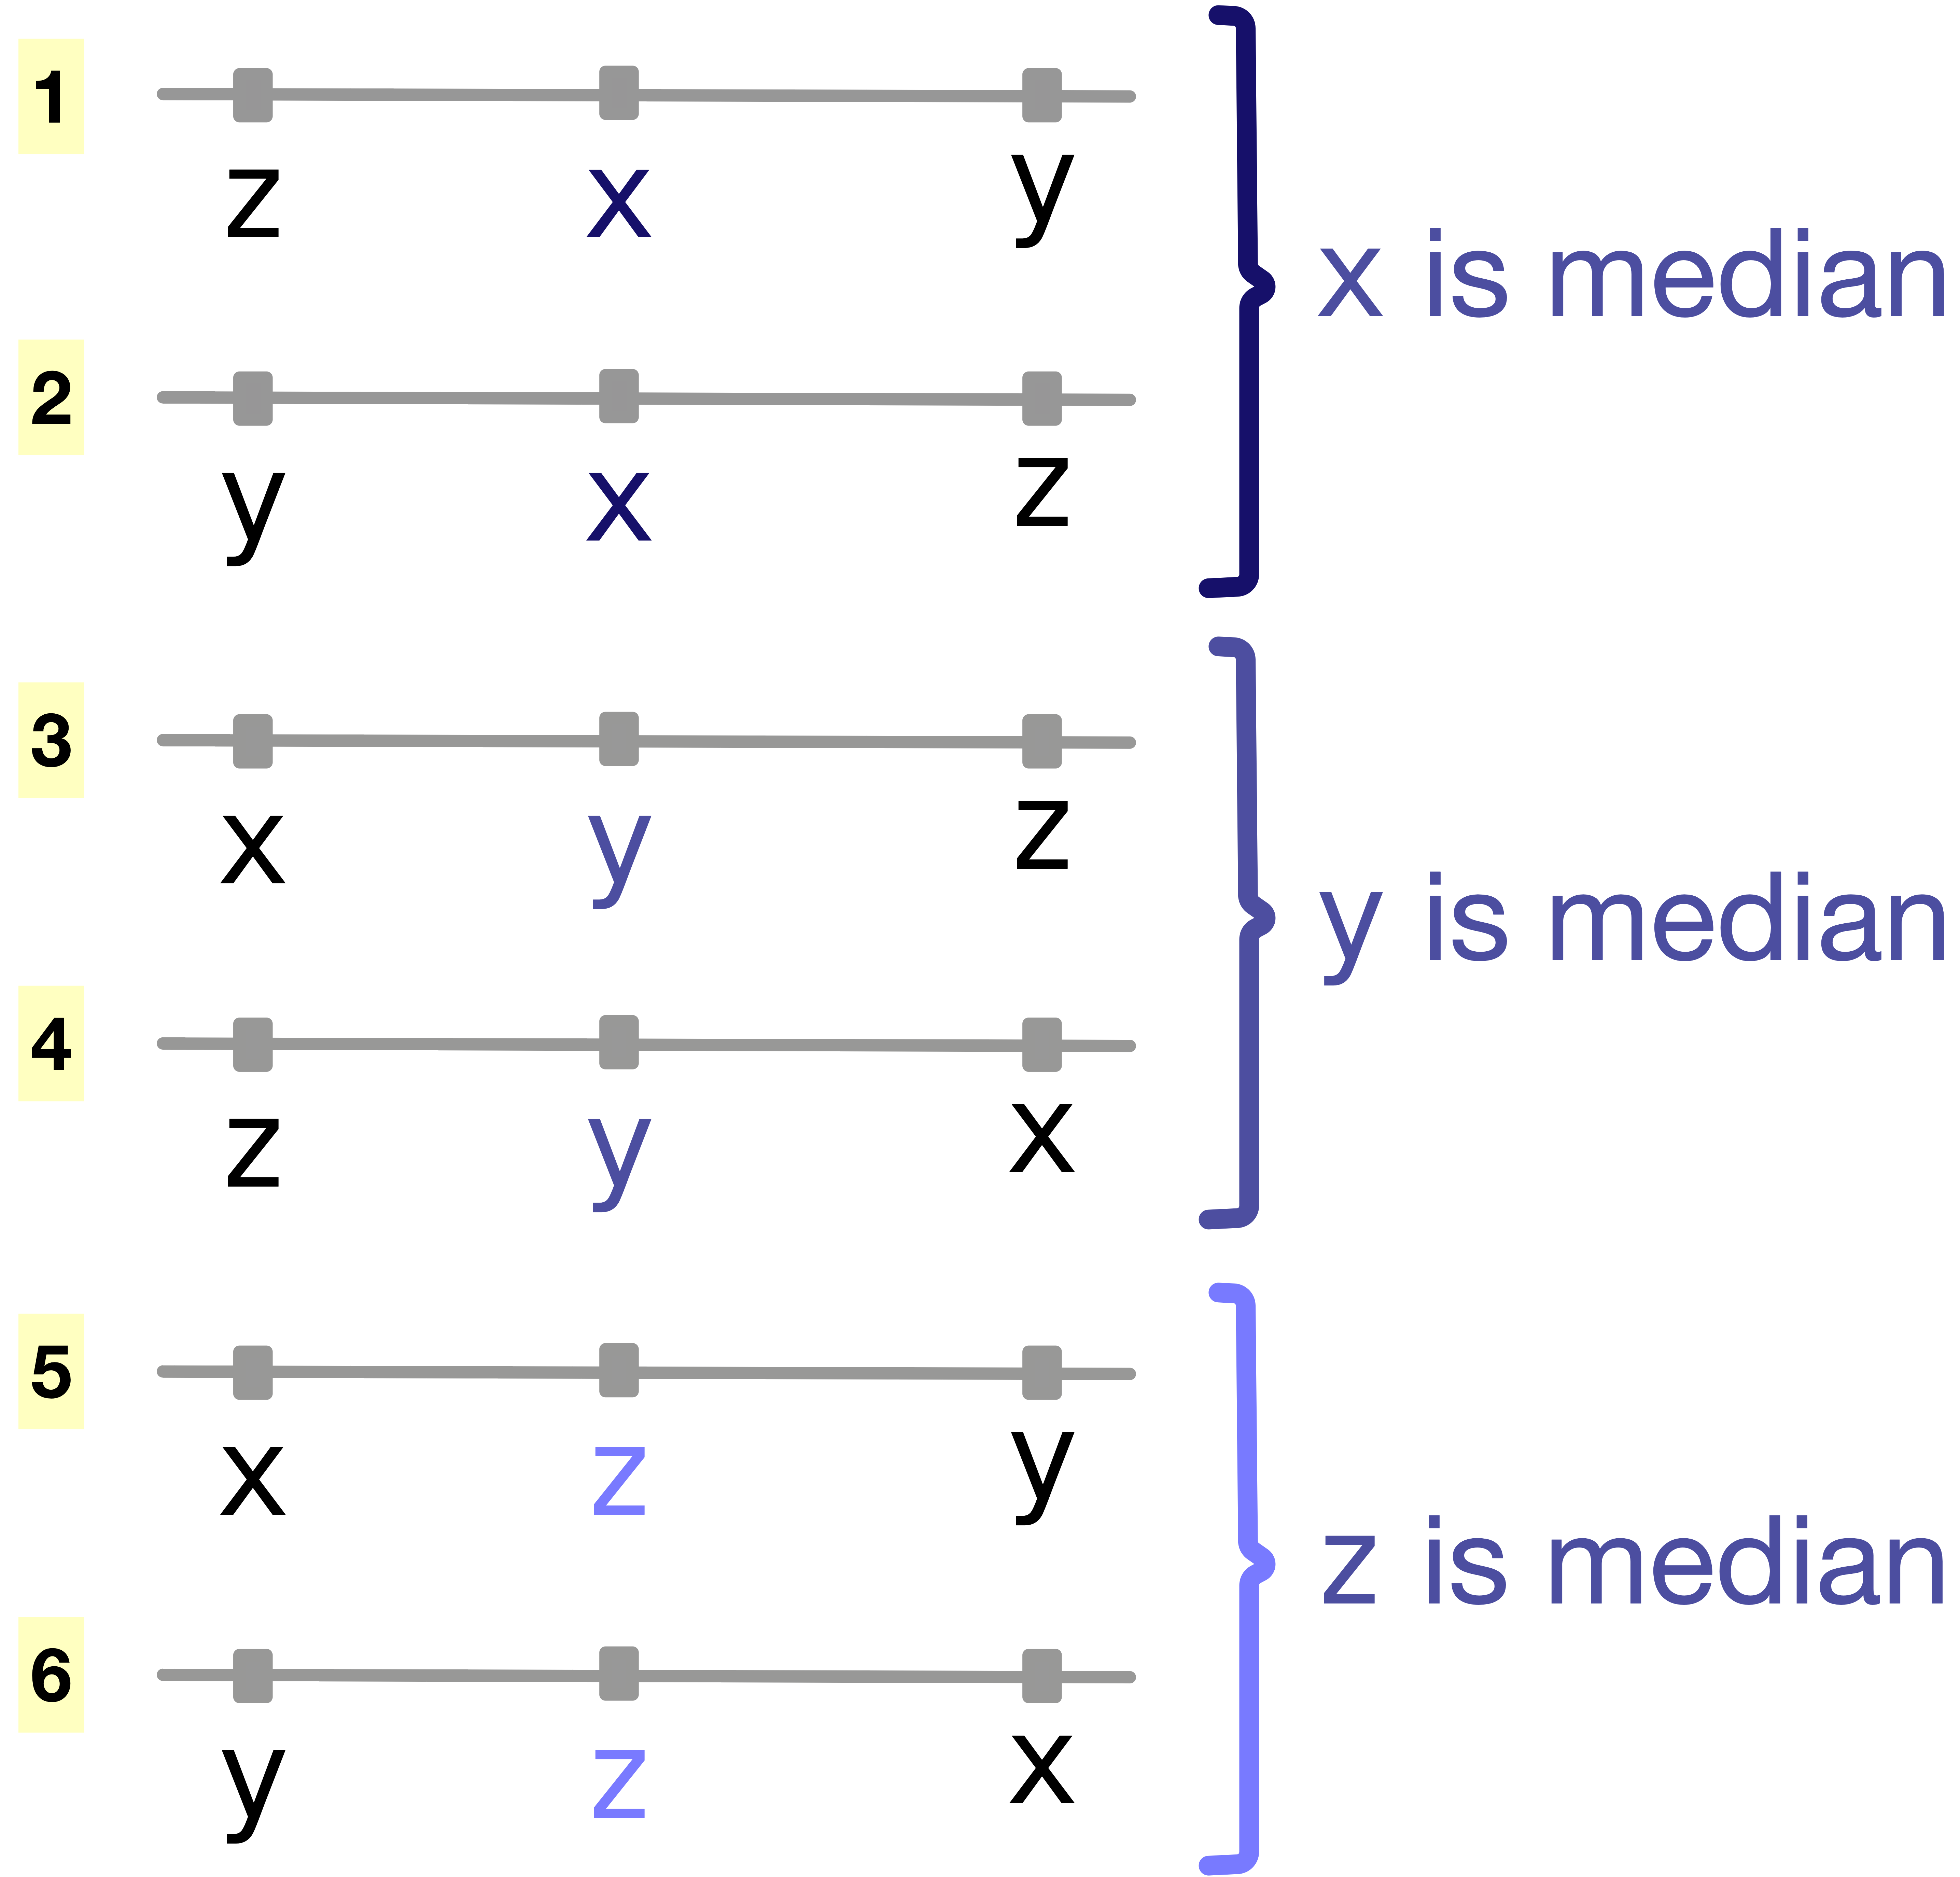 Image showing all possible arrangements of three variables